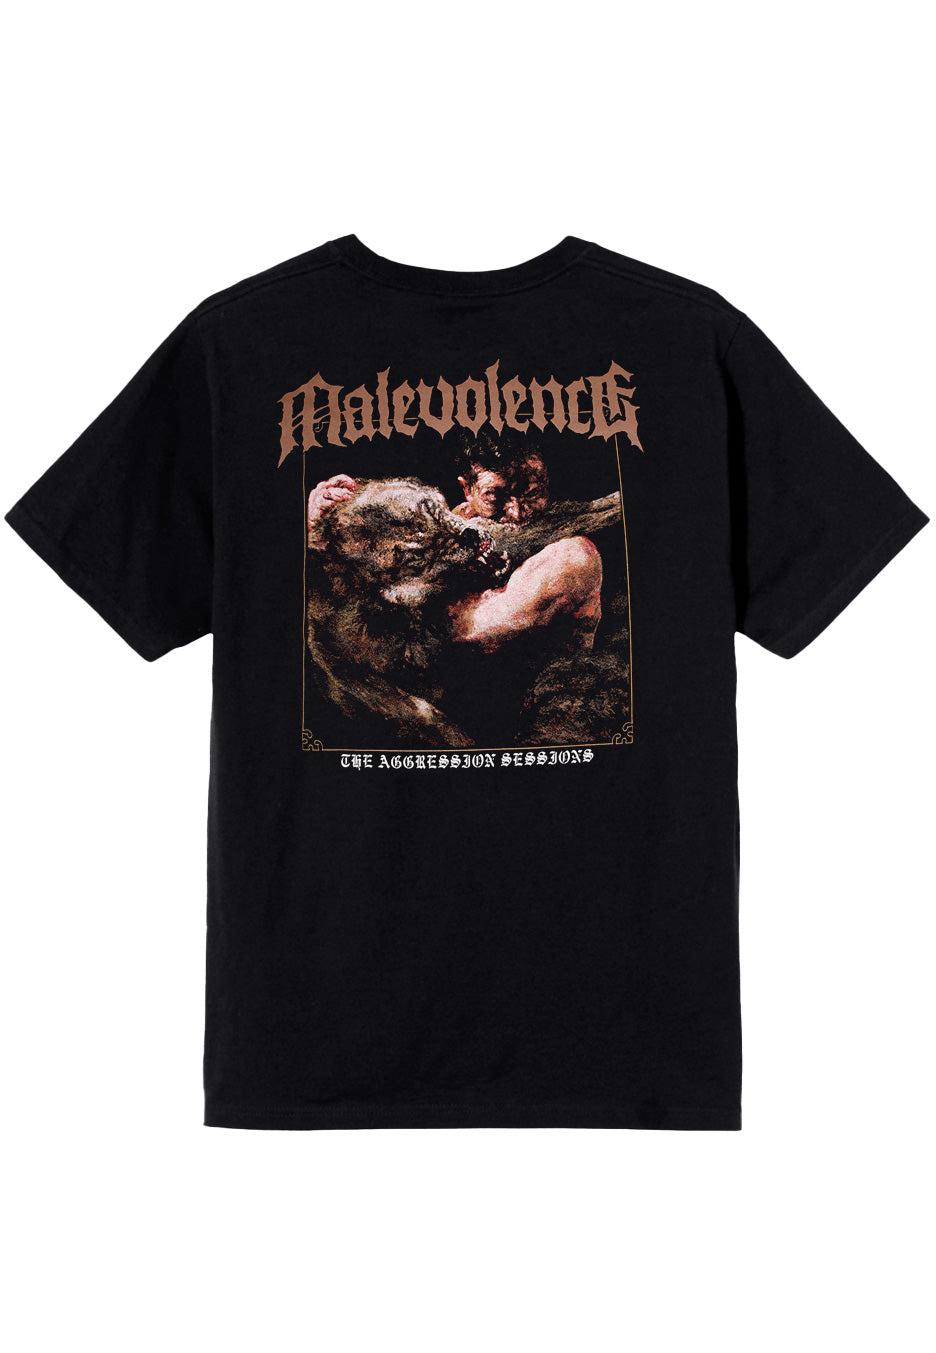 Malevolence - The Aggression Sessions - T-Shirt